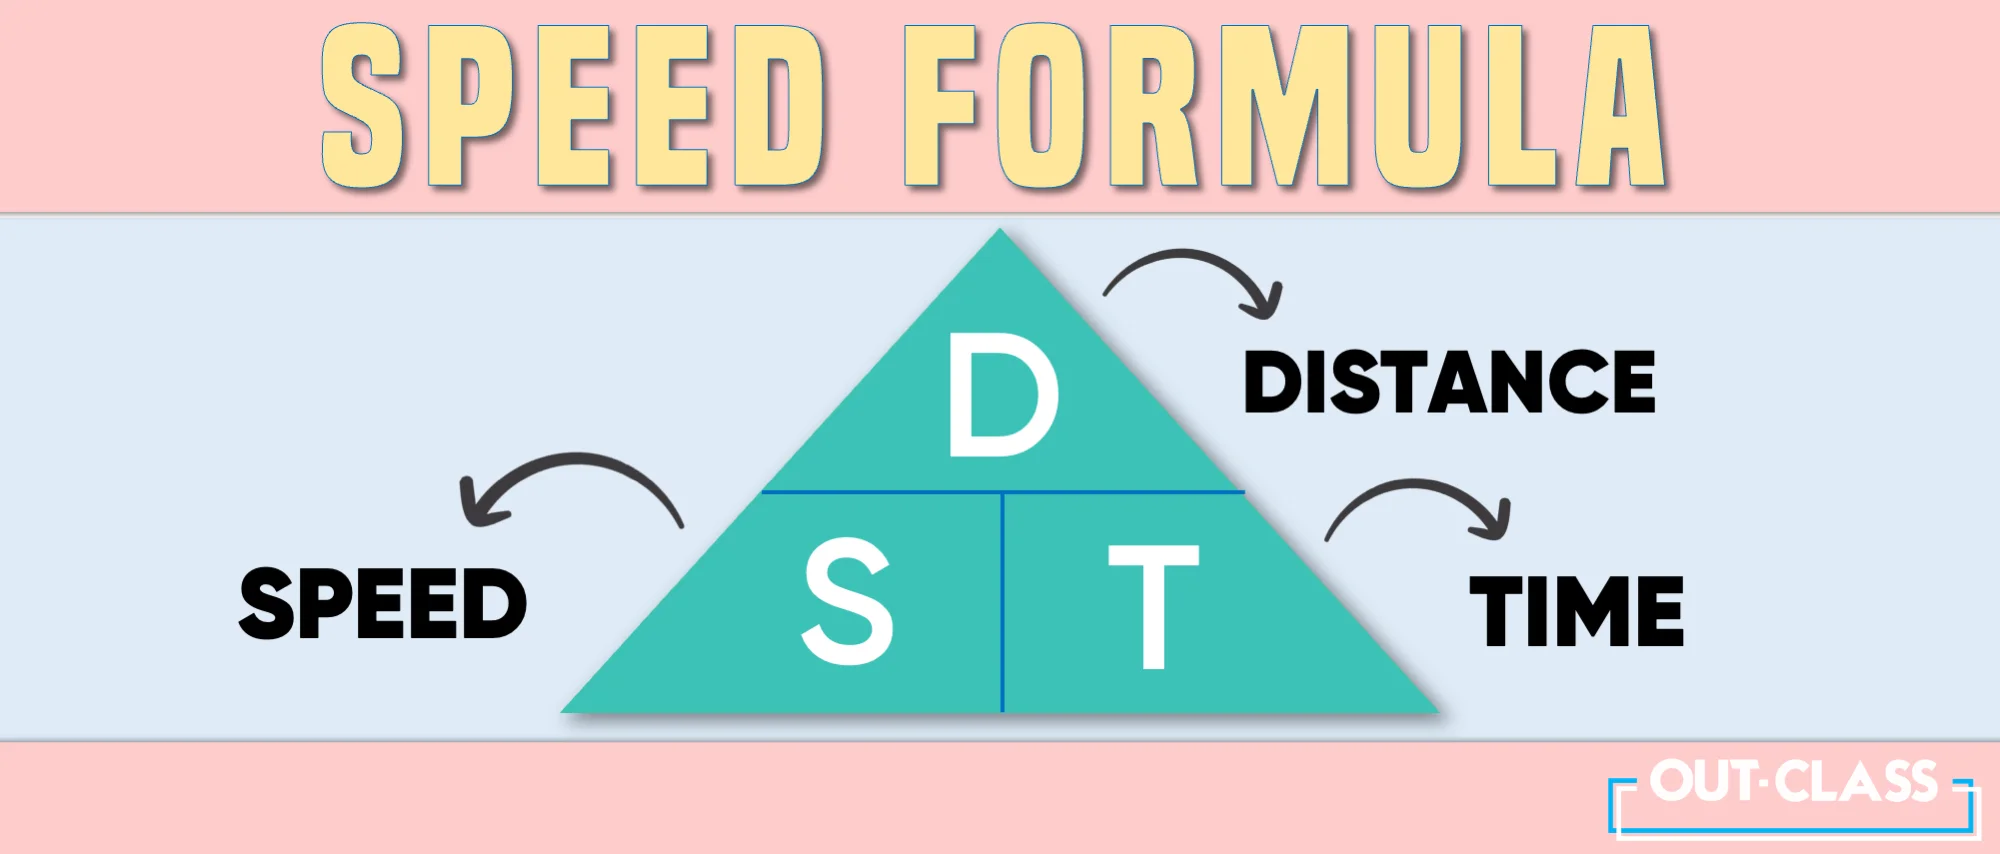 To calculate speed, use the trusty formula: Speed = Distance / Time. 